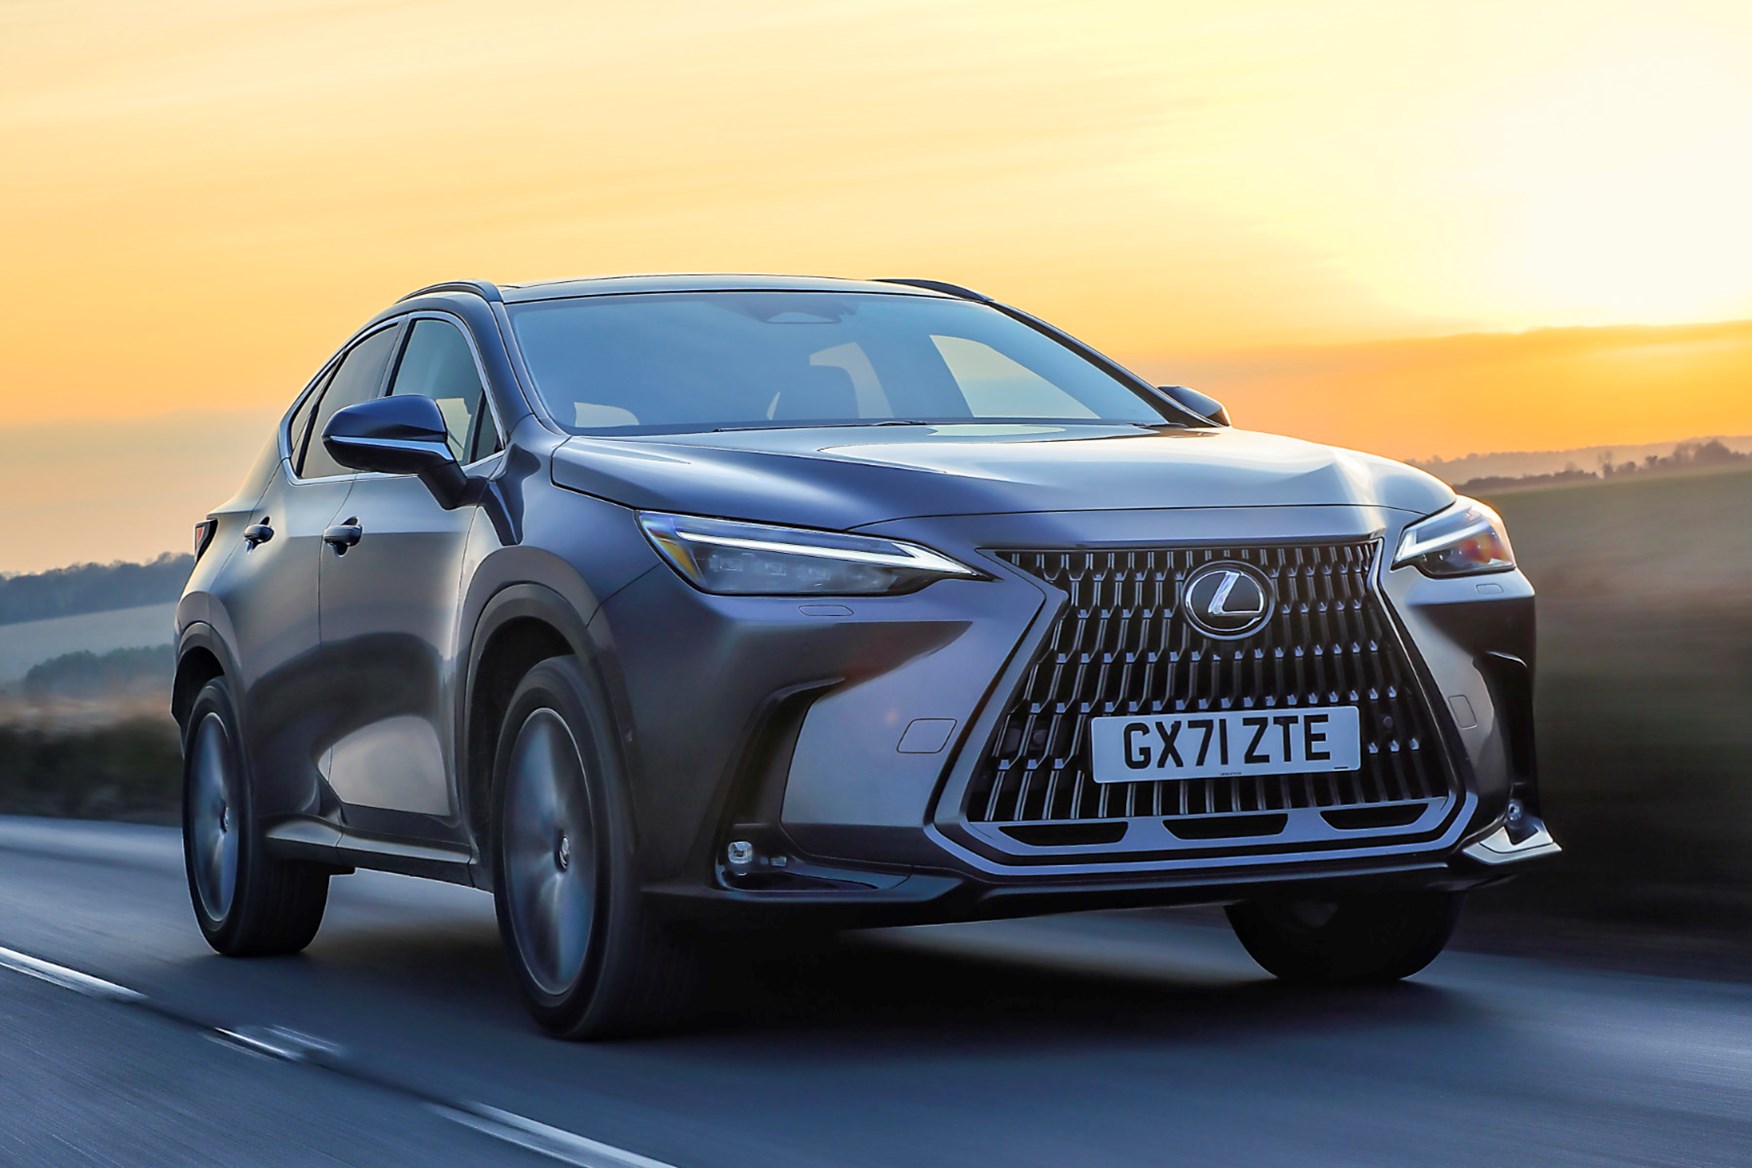 Lexus NX (2023) review: plug-in and self-charging hybrid tested